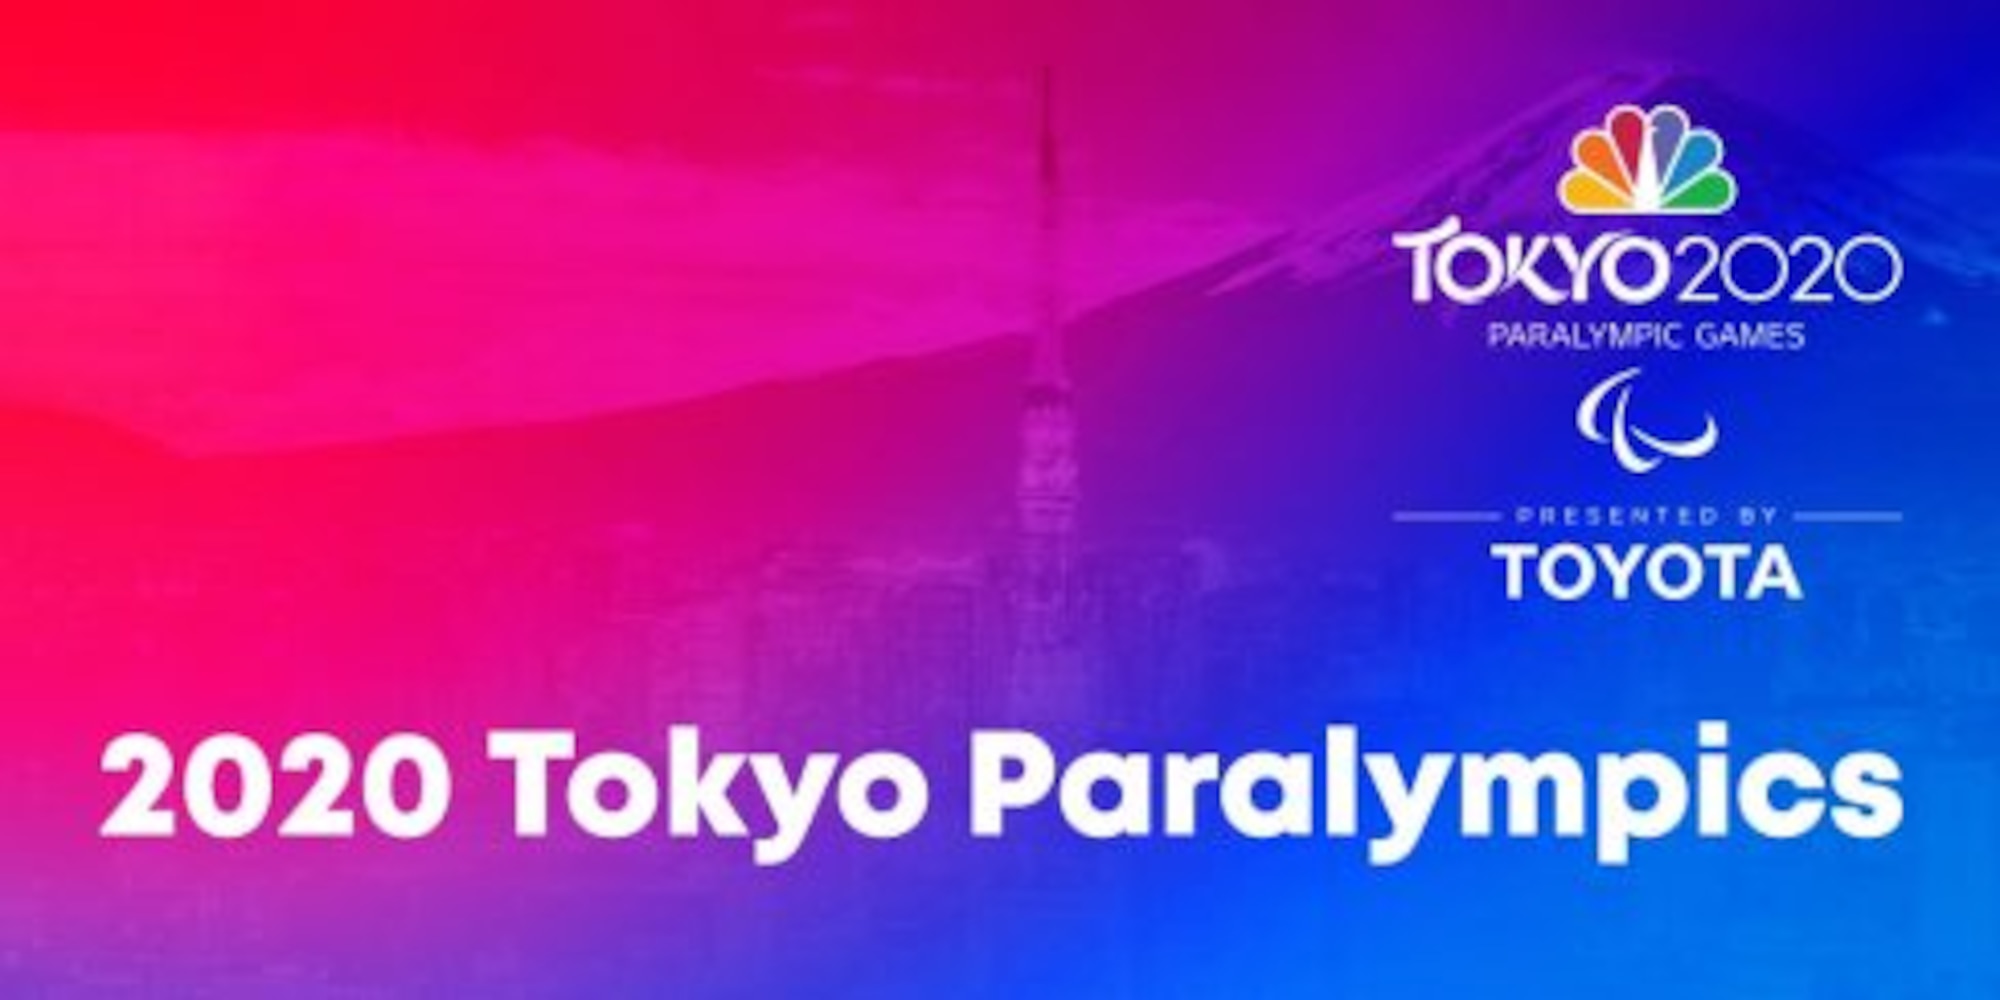 Graphic depicting the 2020 Tokyo Paralympics